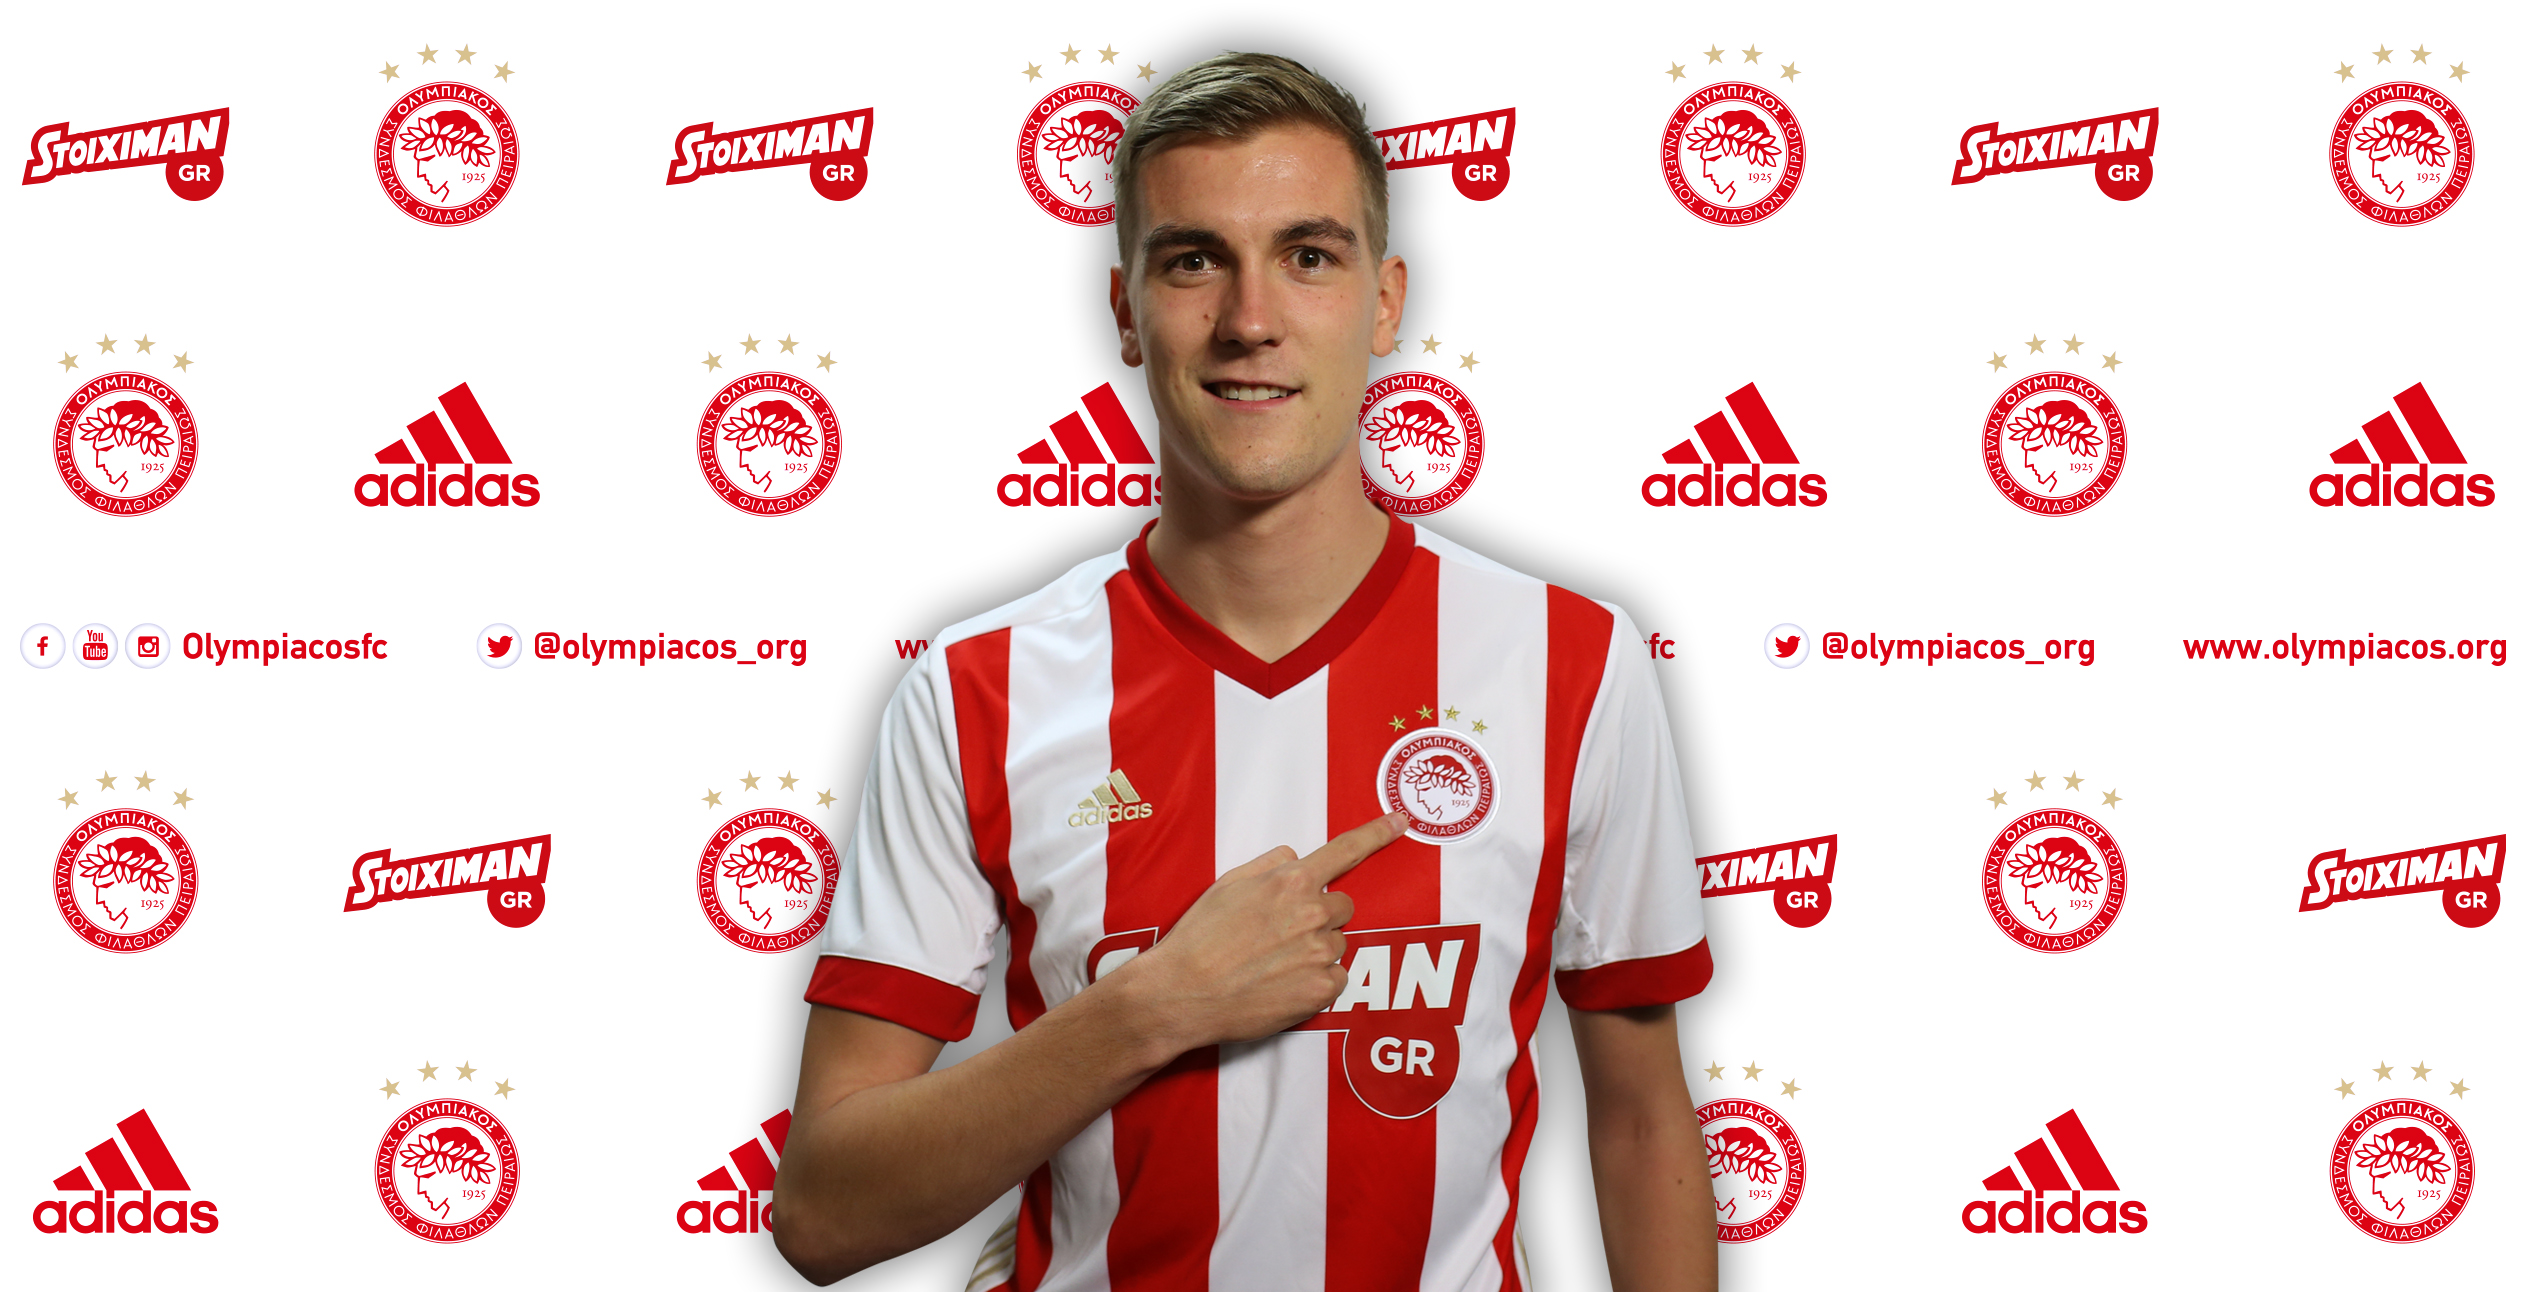 Engels joins Olympiacos!